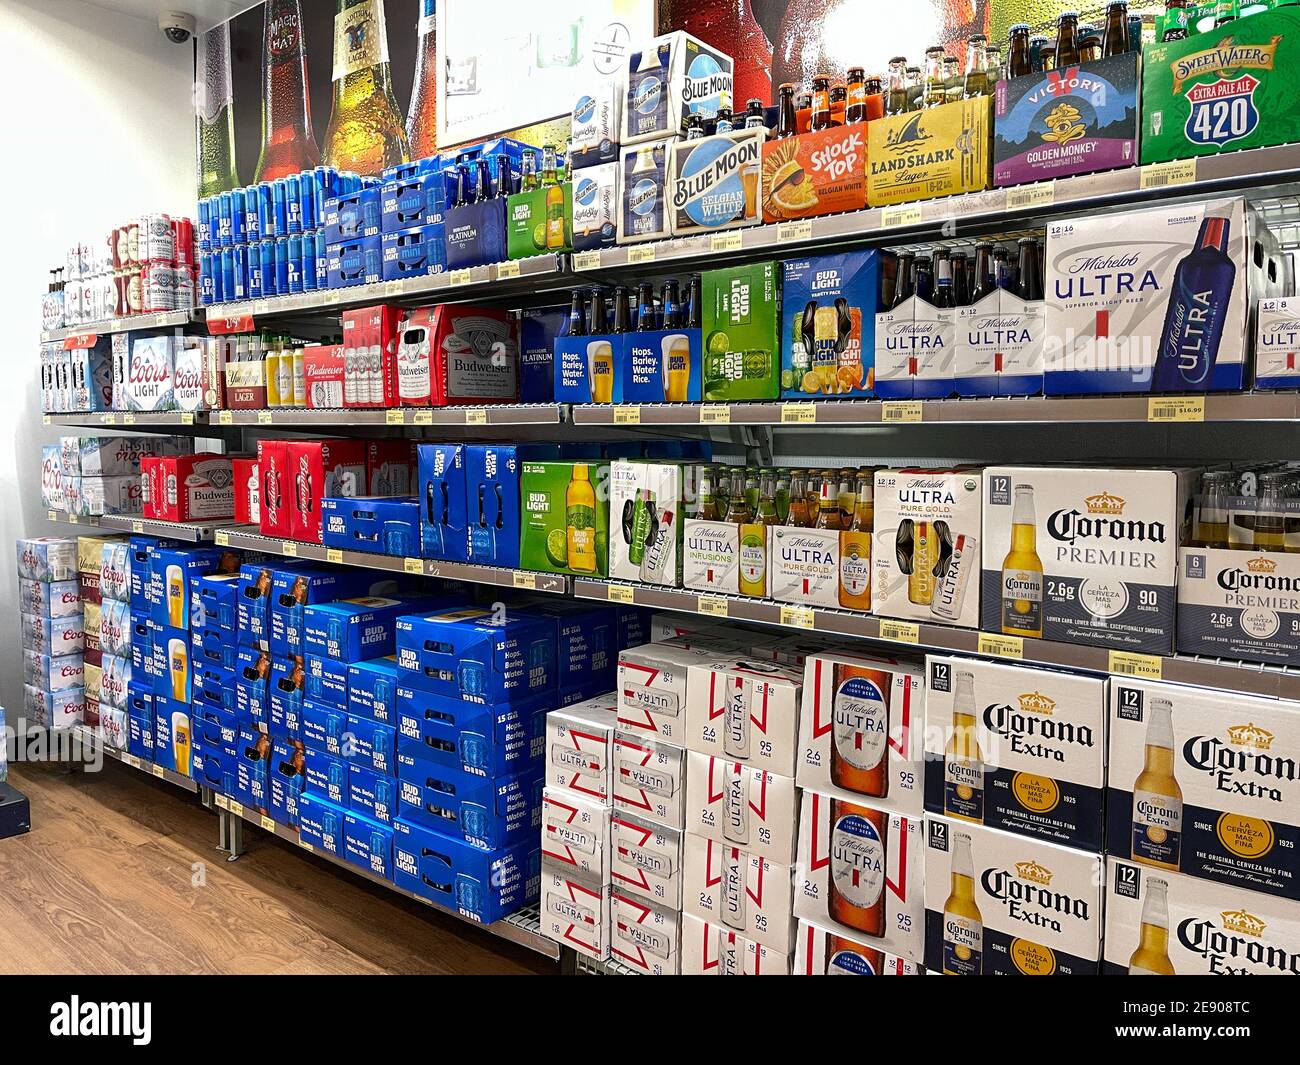 Orlando,FL USA - January 26, 2021:  Cases of beer in a grocery store. Stock Photo